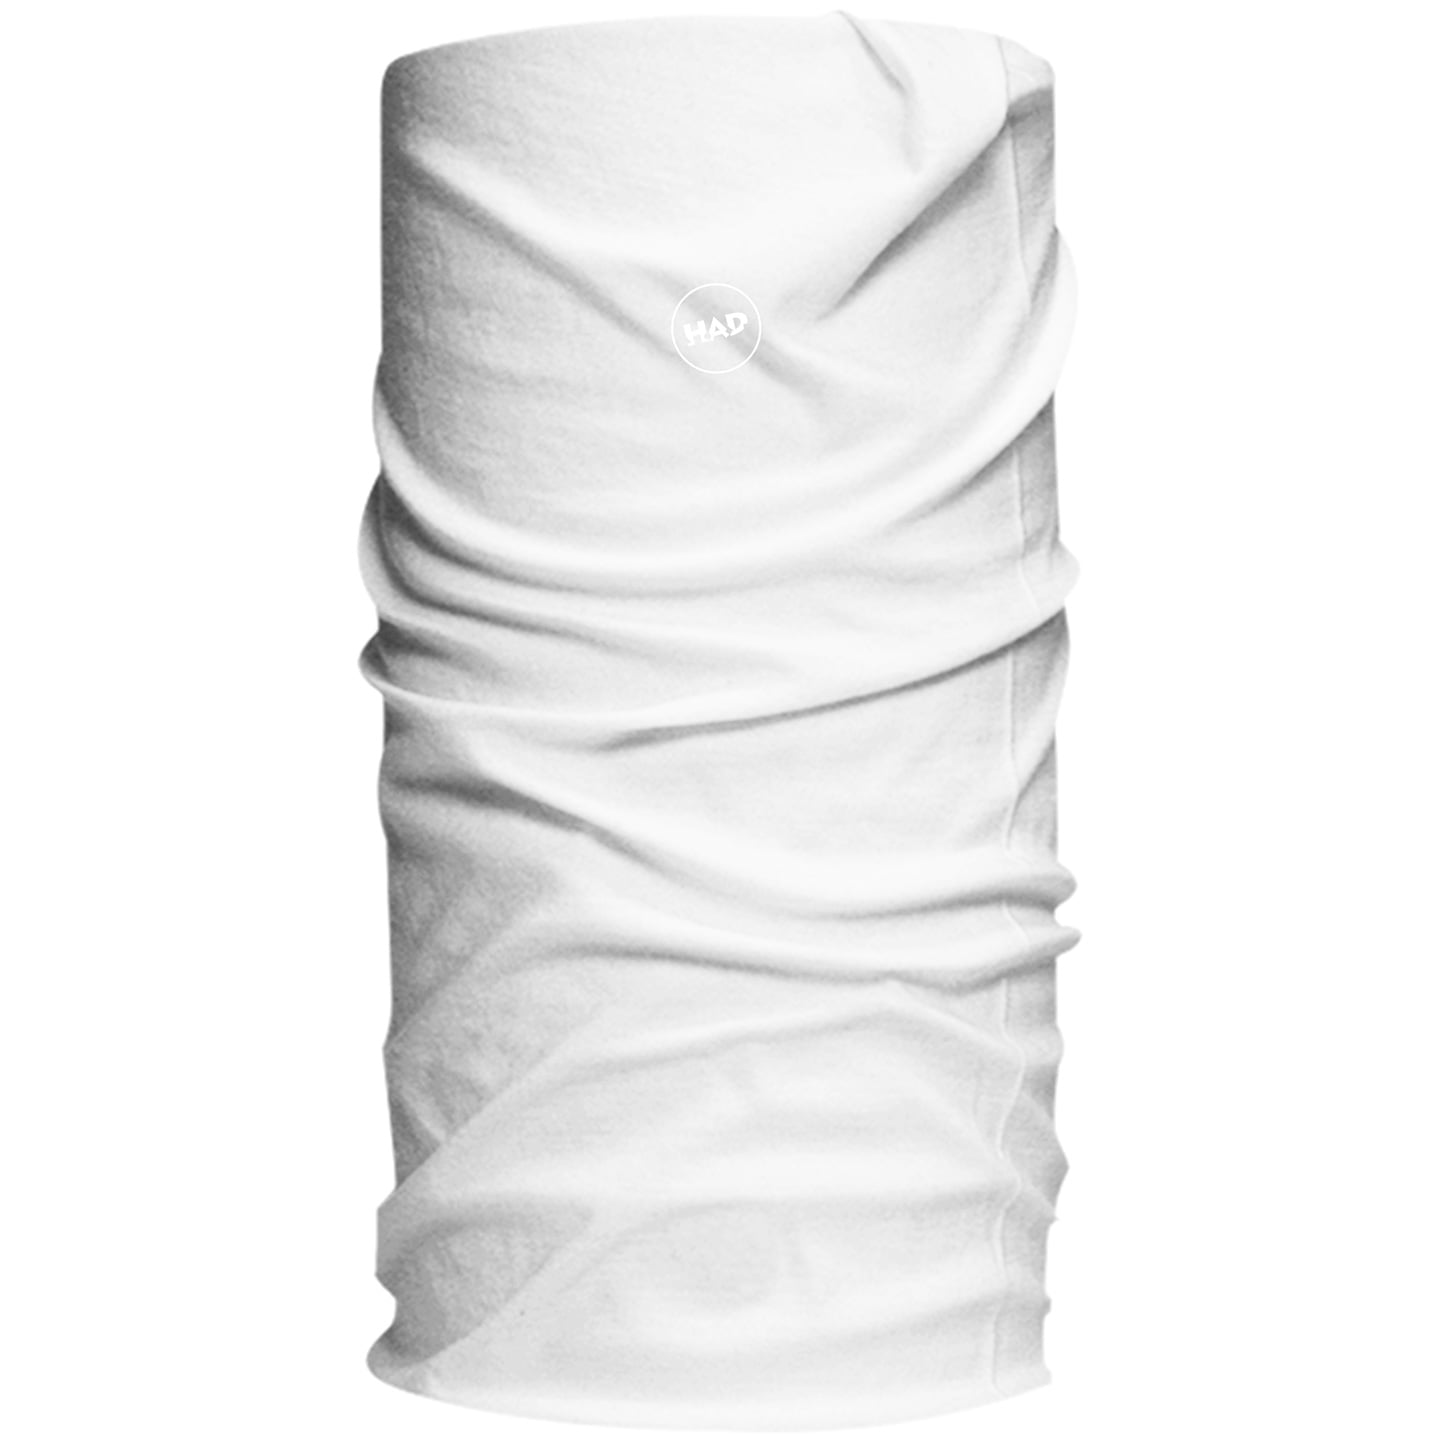 Had Solid Colors White Multifunctional Scarf White 6316